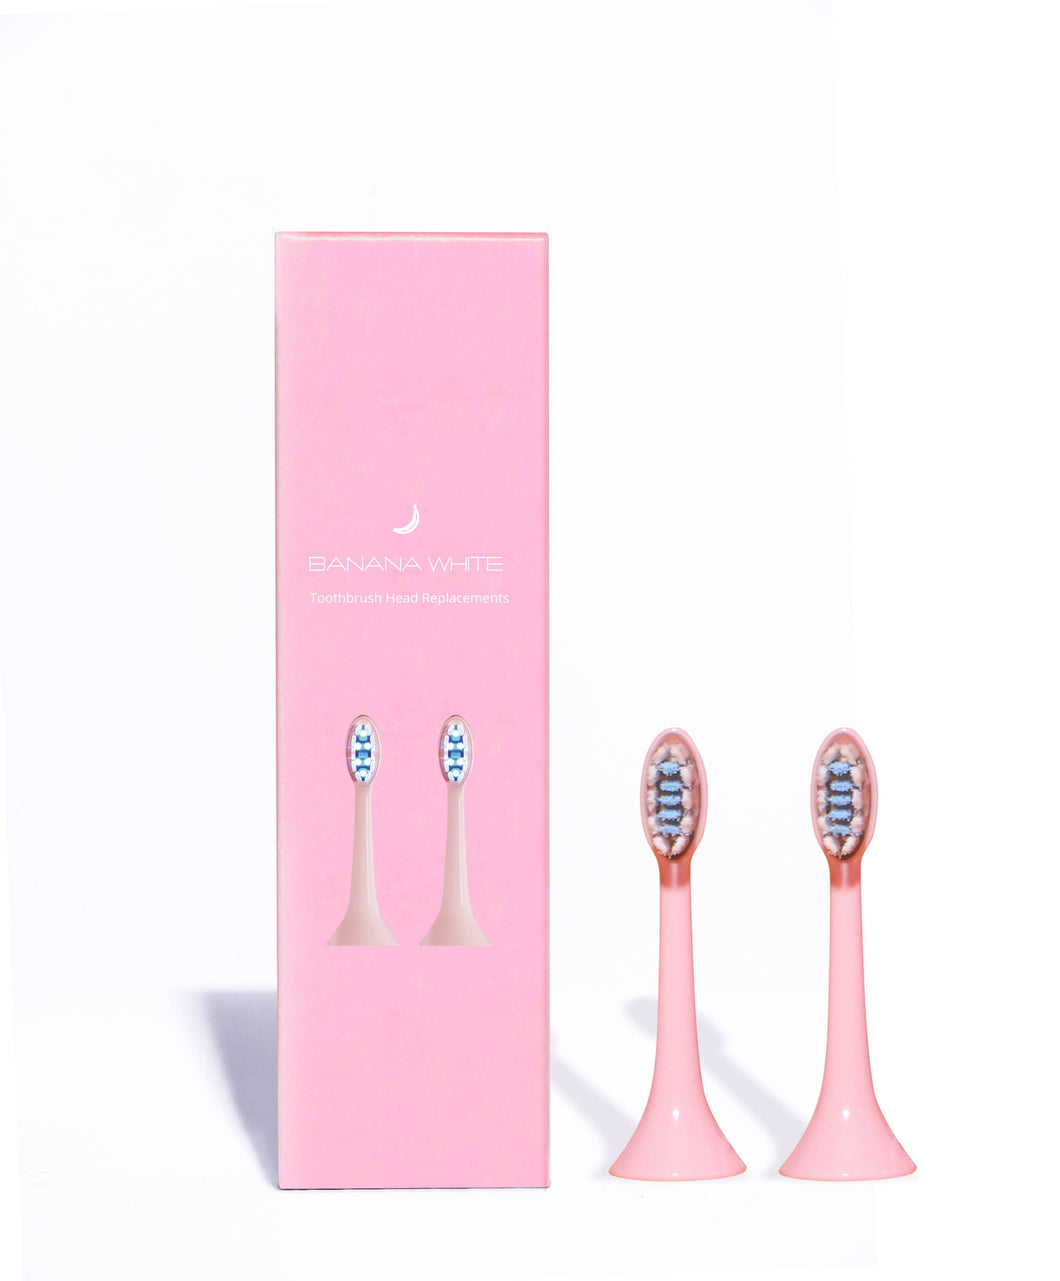 Toothbrush Replacement Heads